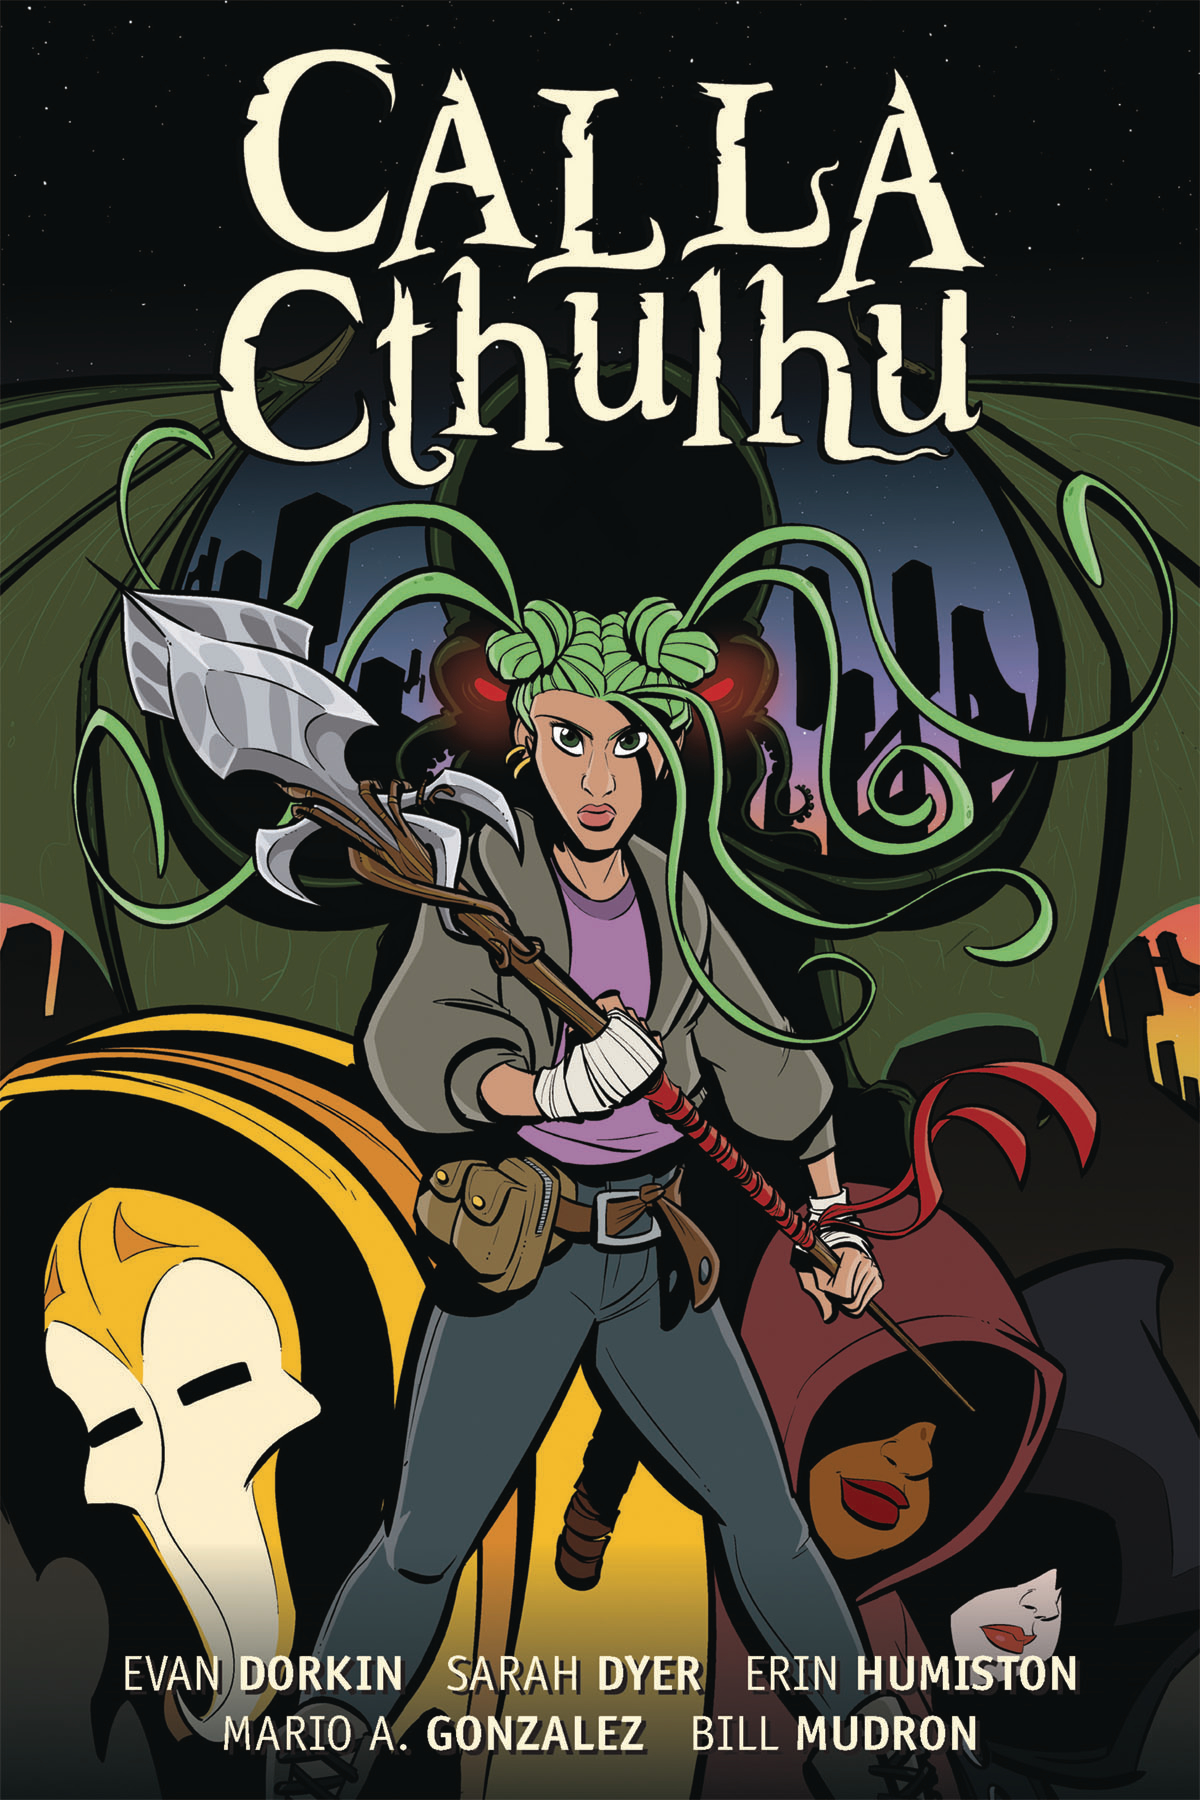 Cover to 'Calla Cthulhu'. Art by Erin Humiston and Bill Muldron/Dark Horse Comics